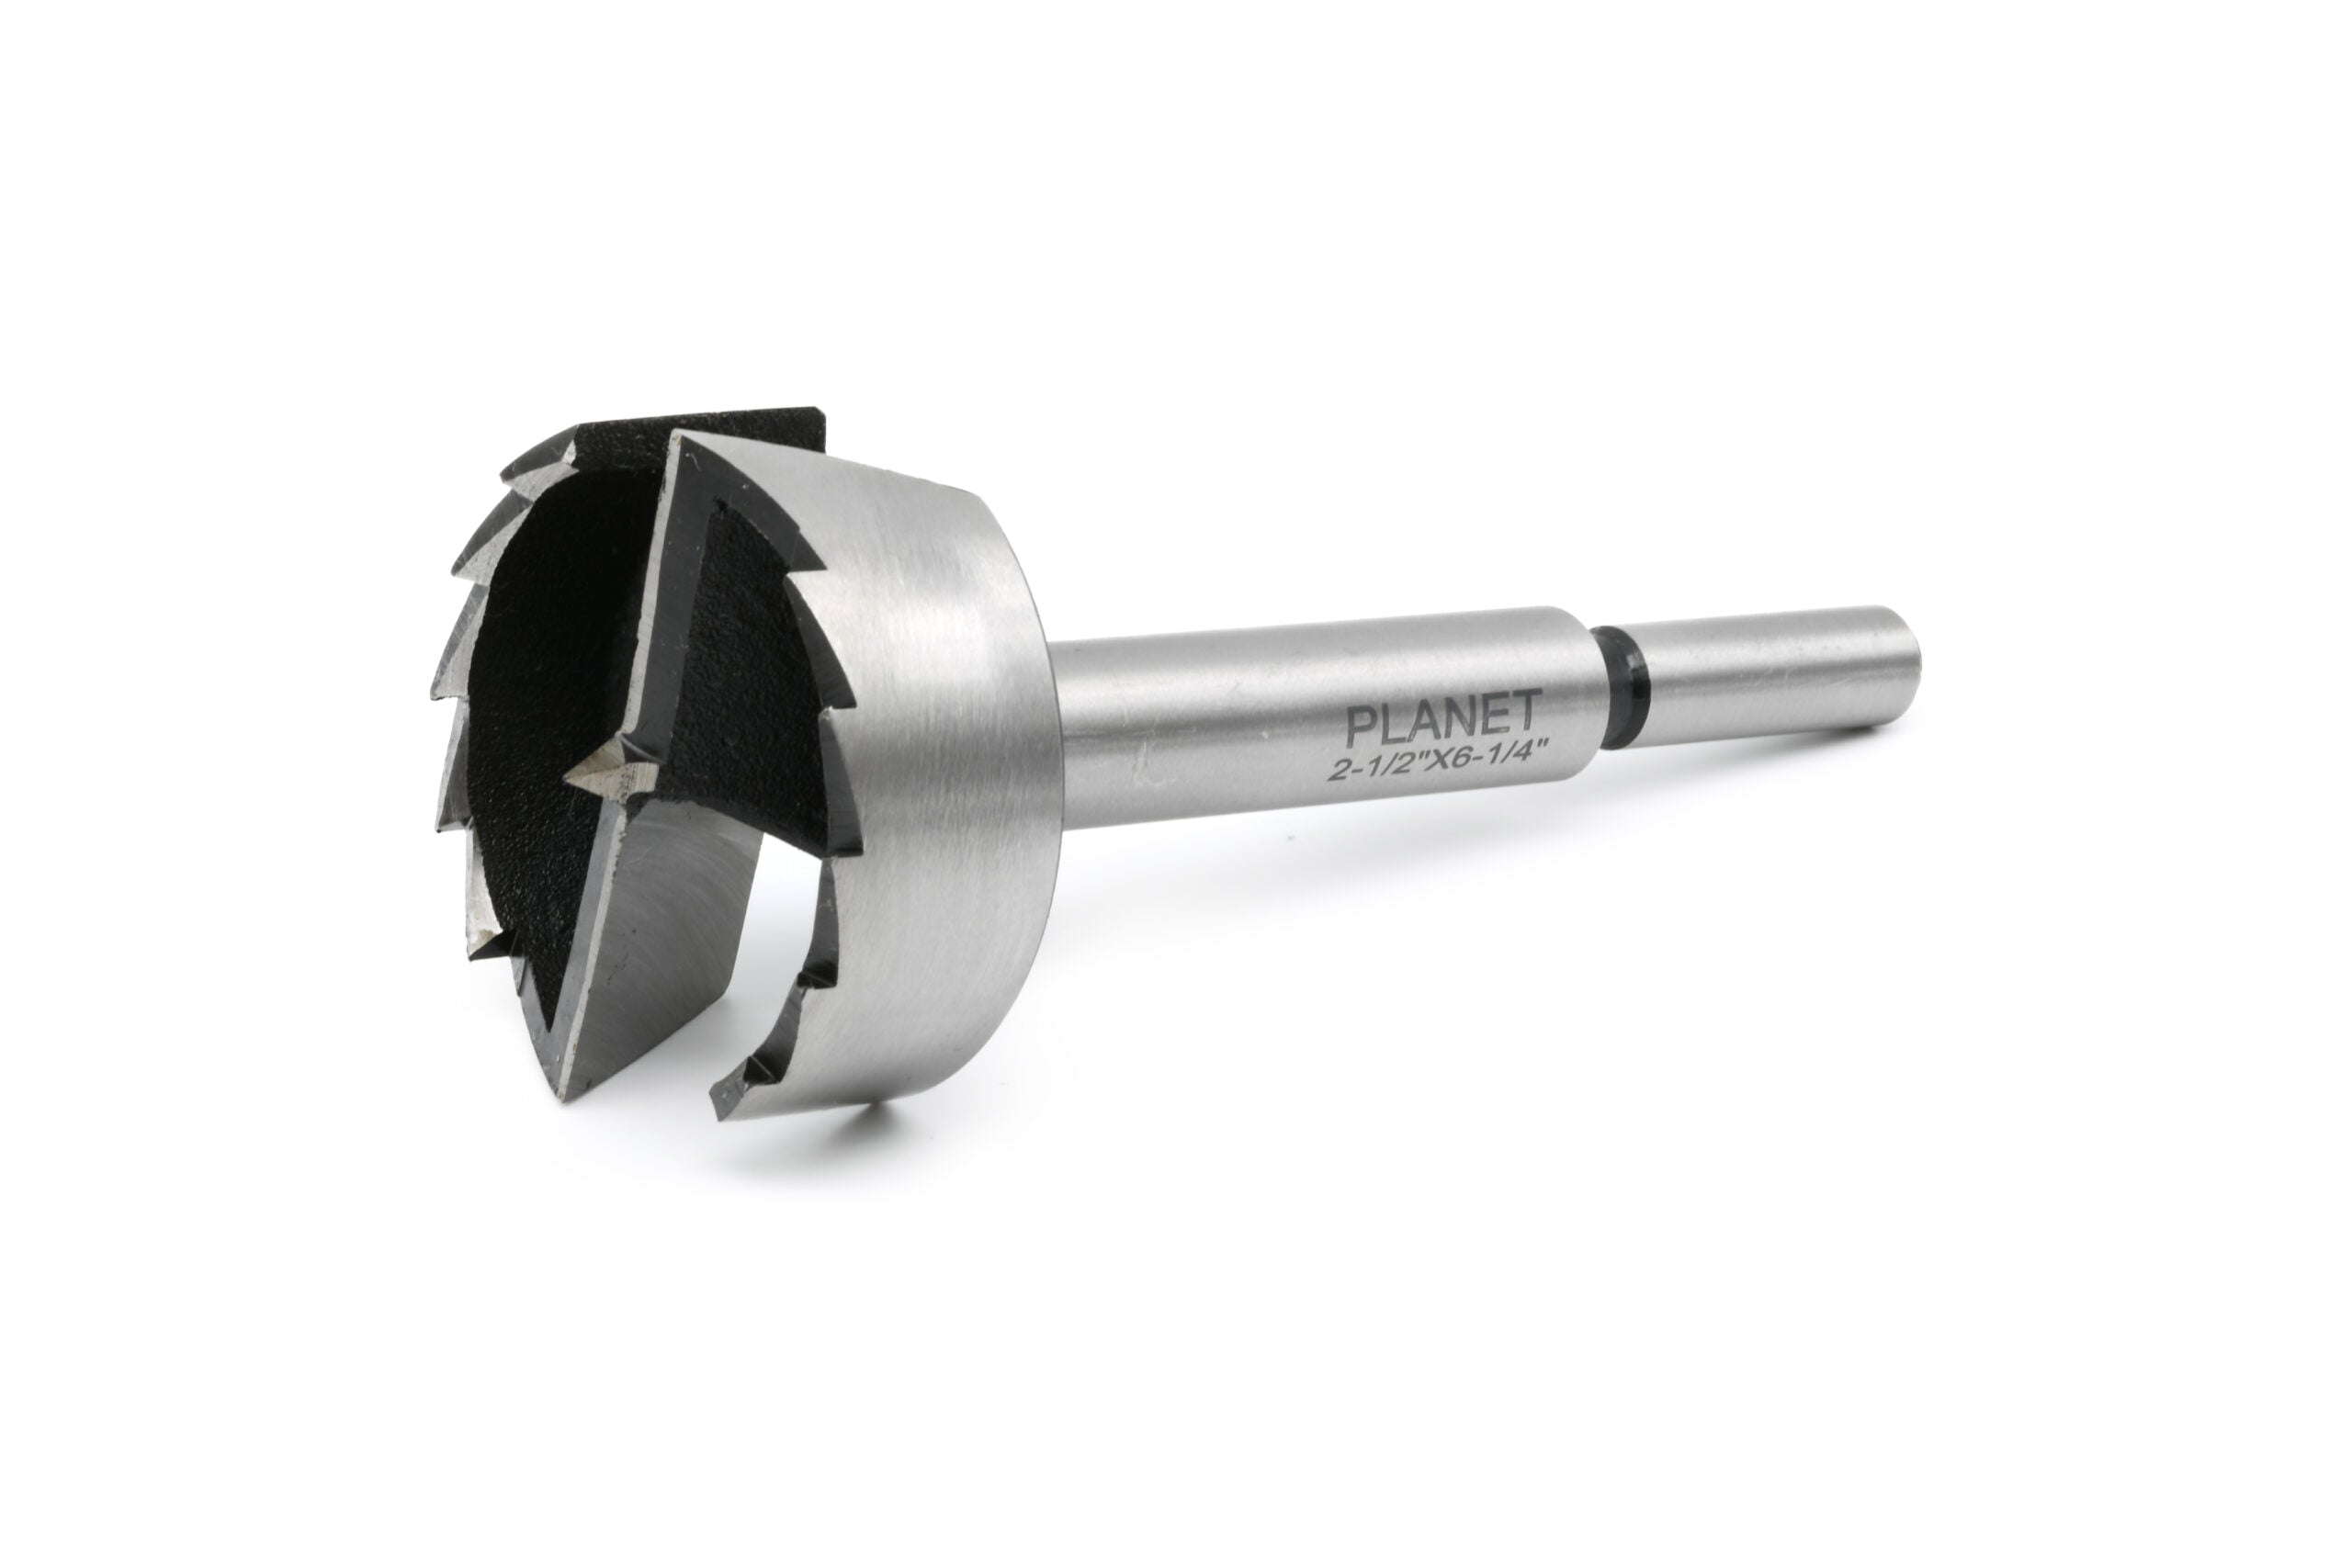 Planet Long Series Saw Tooth Forstner Bit 1-1/4" 31.75mm